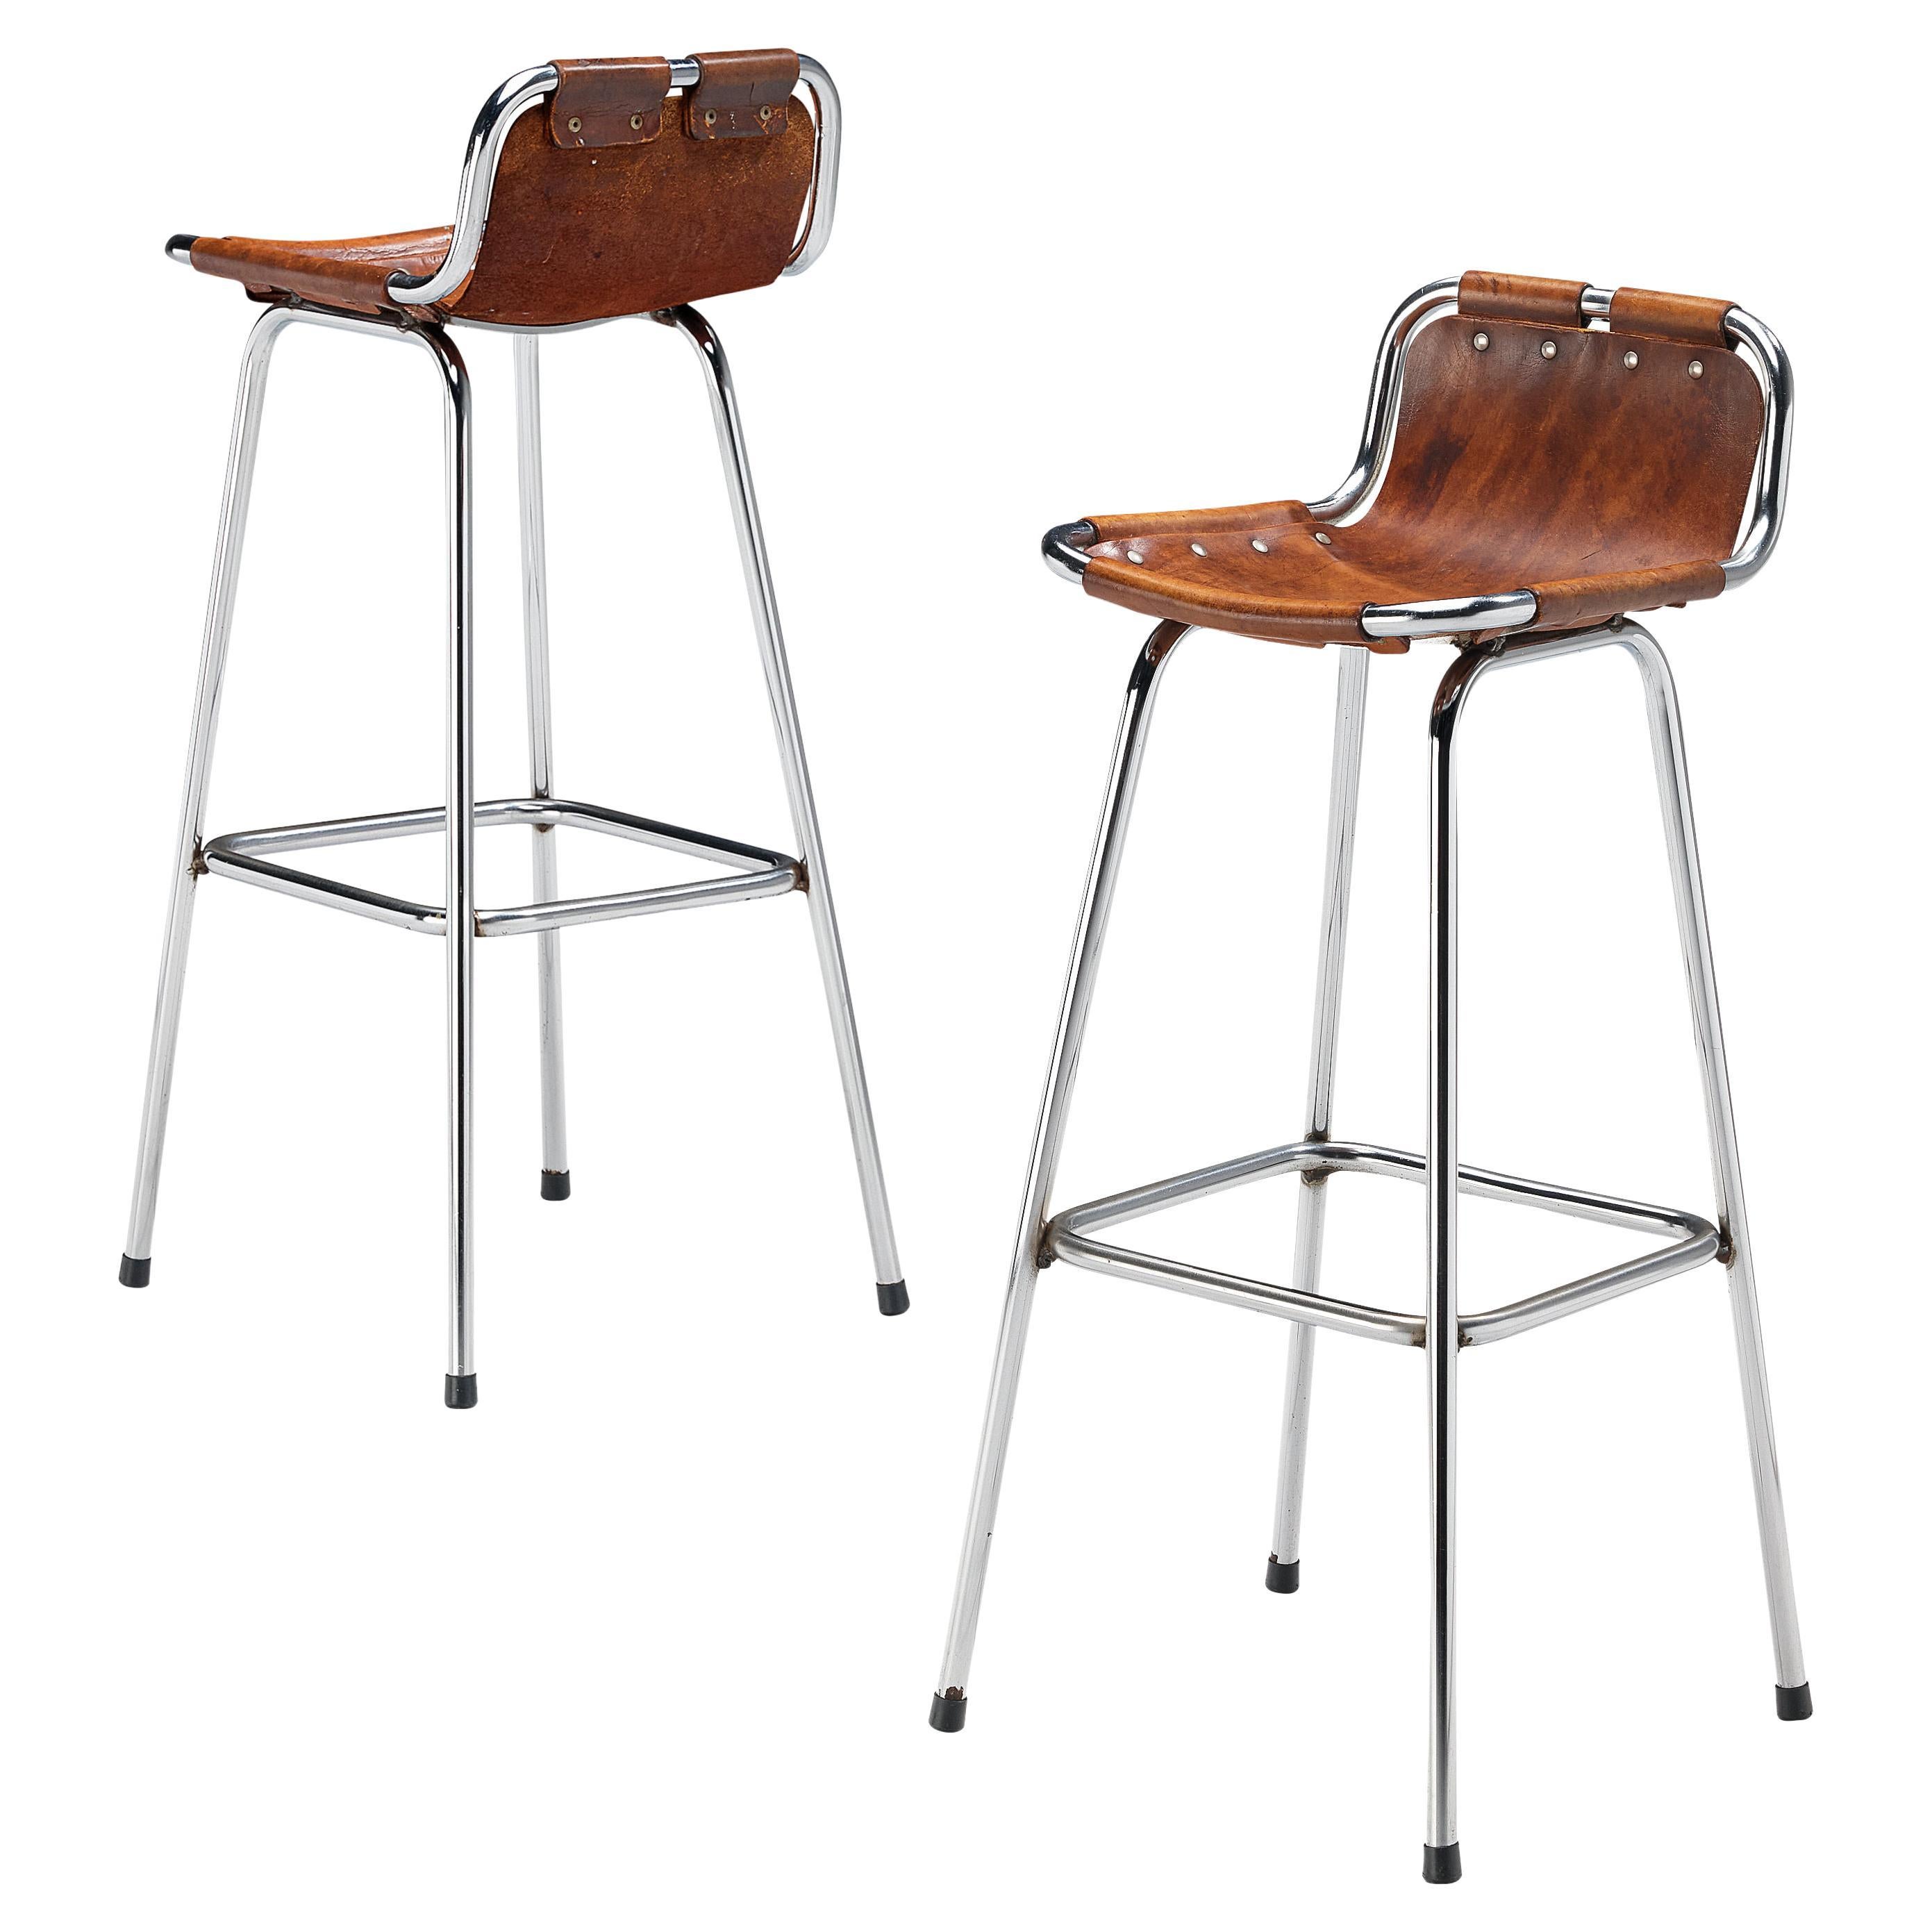 Charlotte Perriand Pair of Bar Stools in Leather